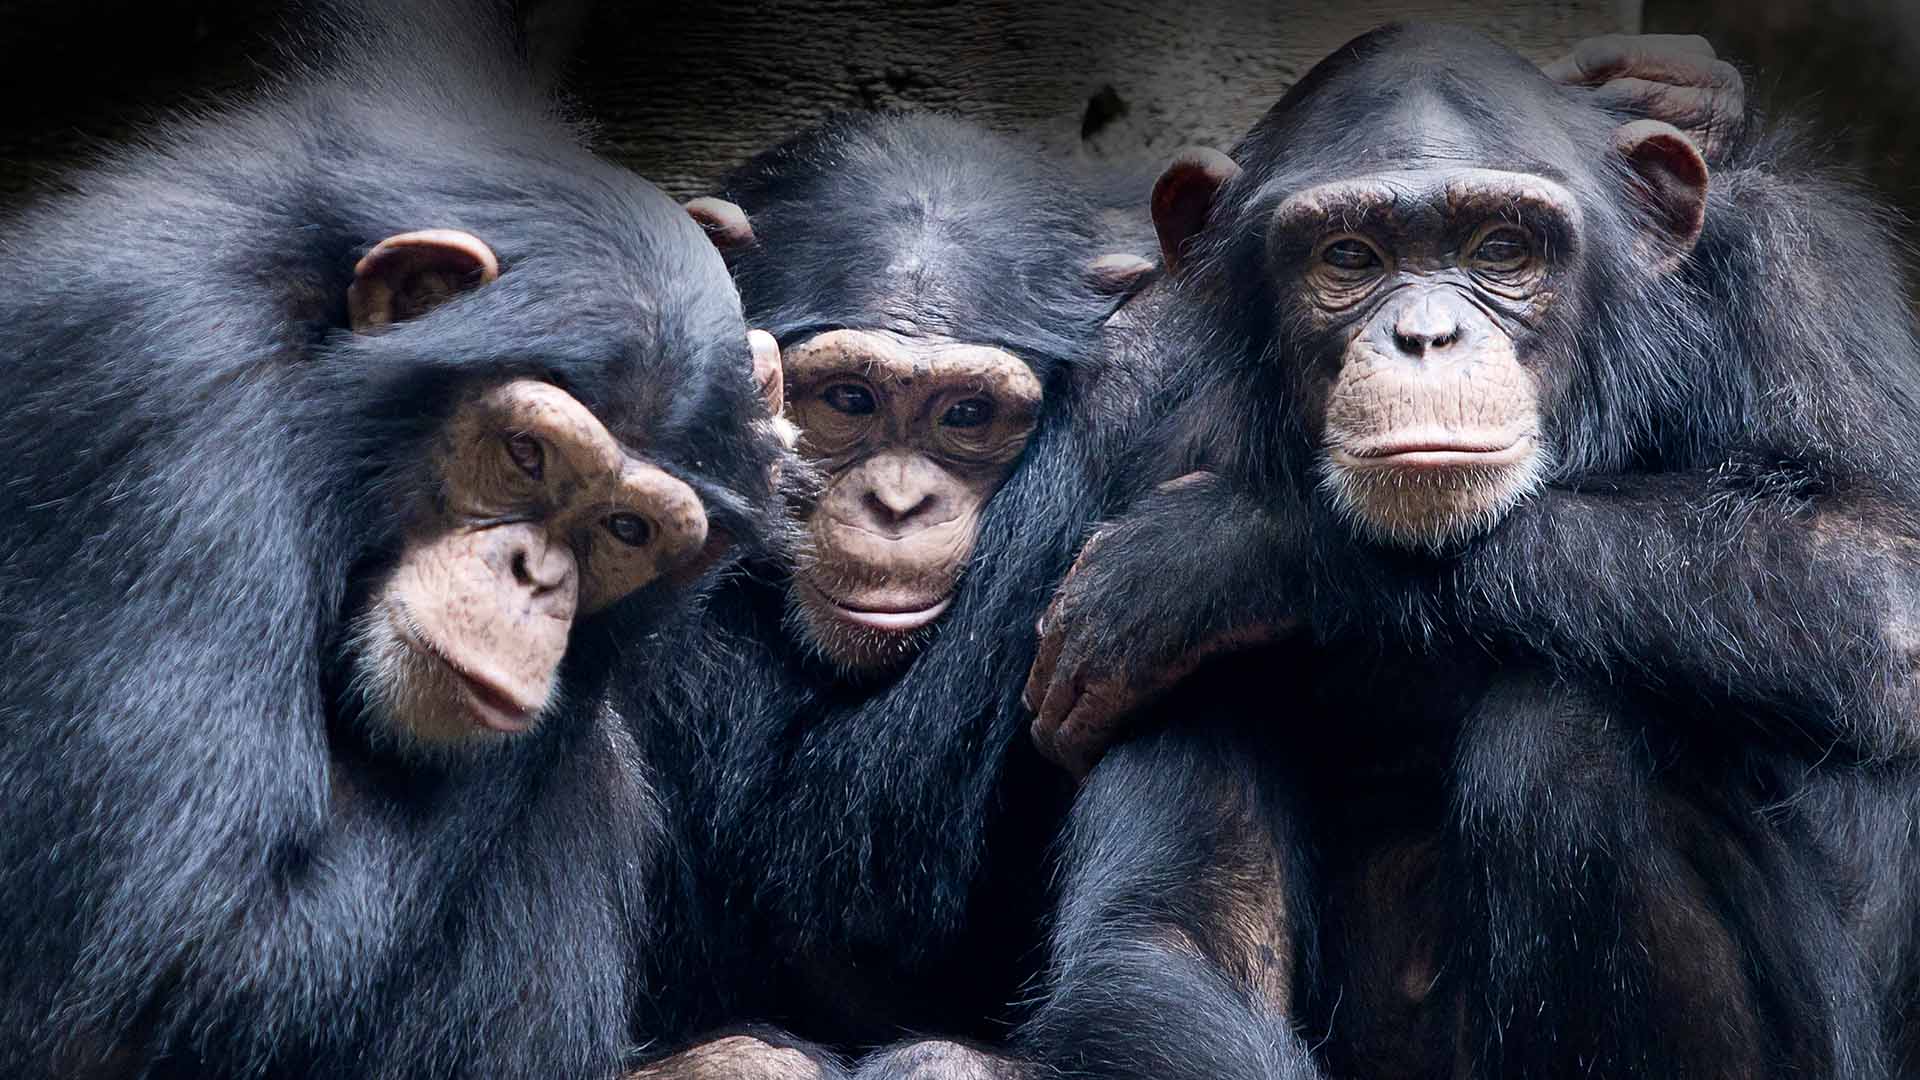 Filmmaking might become so easy that chimps could do it. Image: 